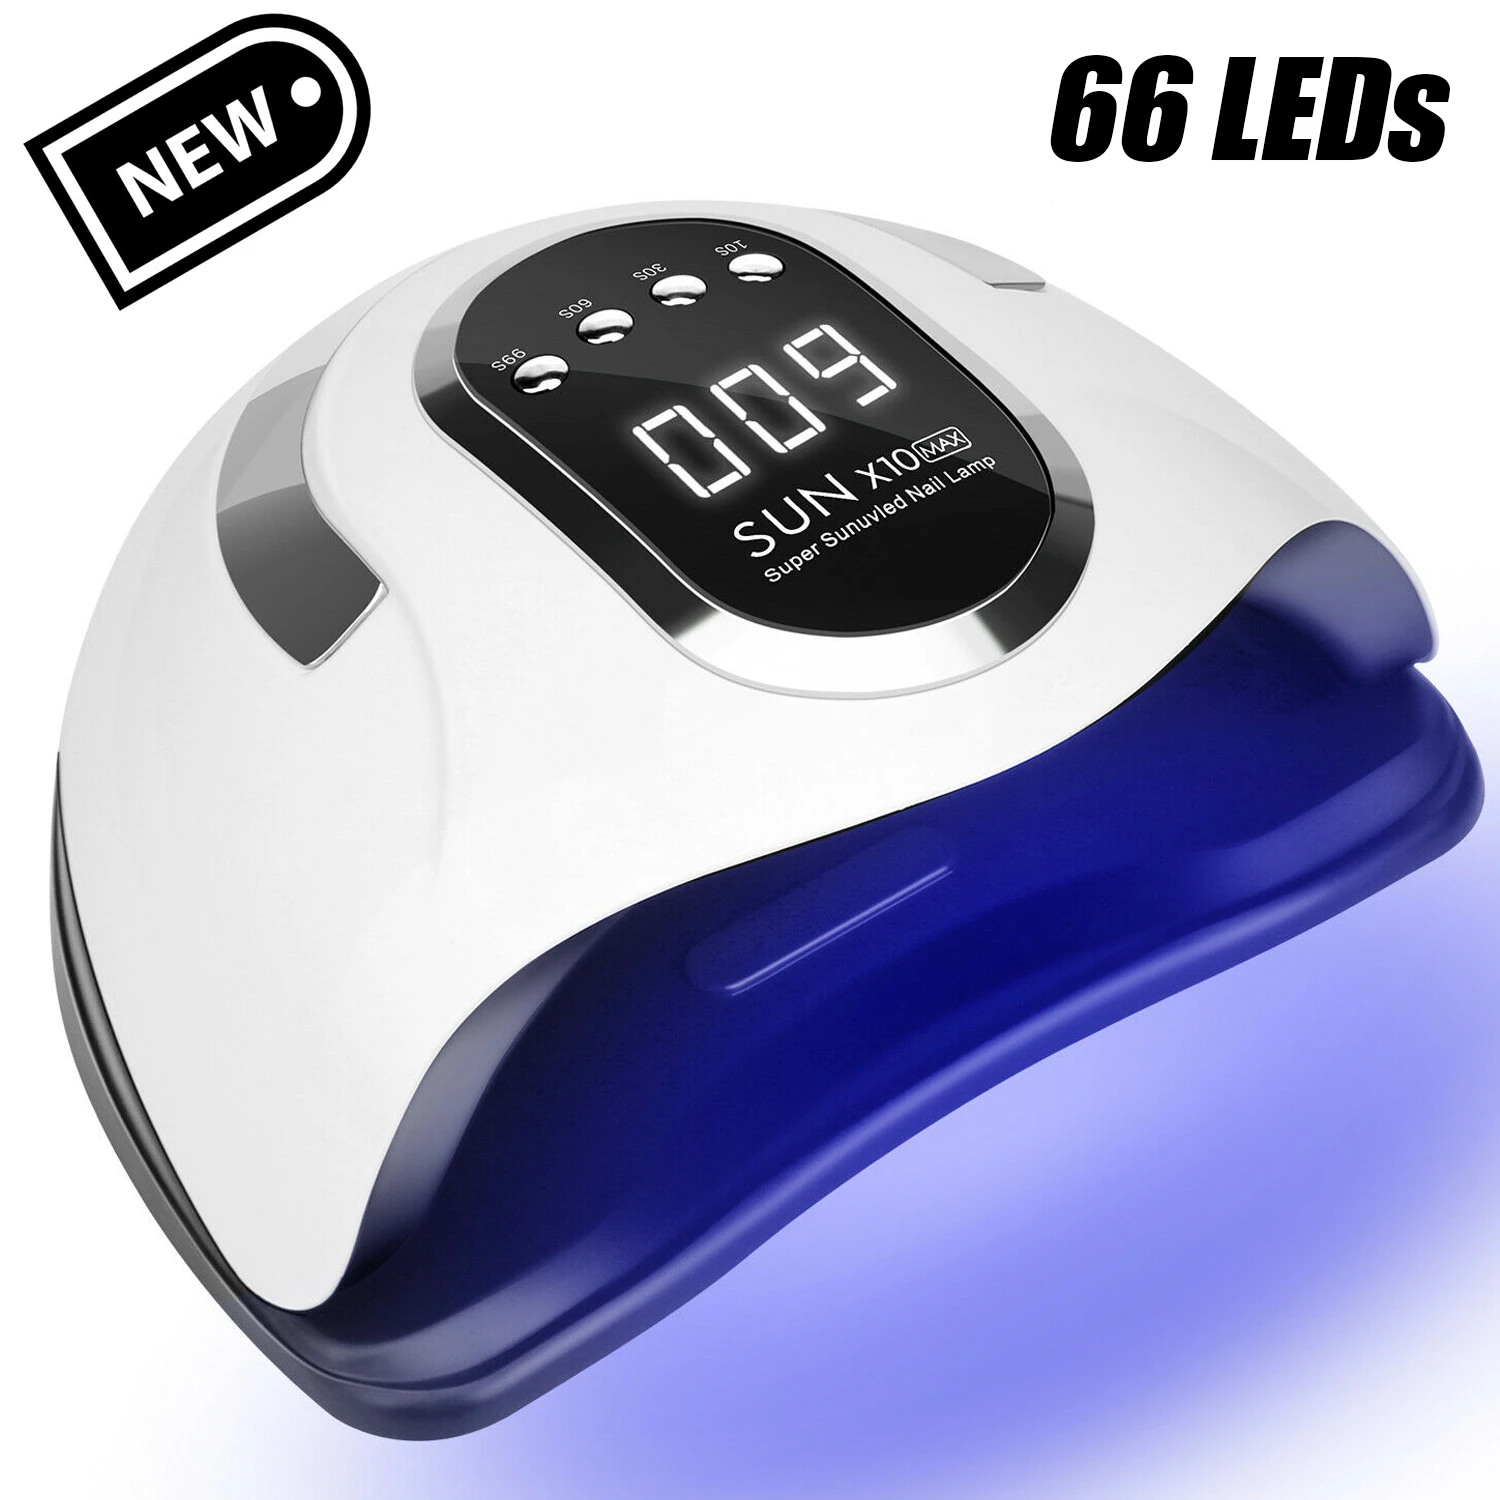 SUN X10 Max UV LED Nail Lamp For Fast Drying Gel Nail Polish Dryer 66LEDS  Home Use Ice Lamp With Auto Sensor For Manicure Salon| | - AliExpress